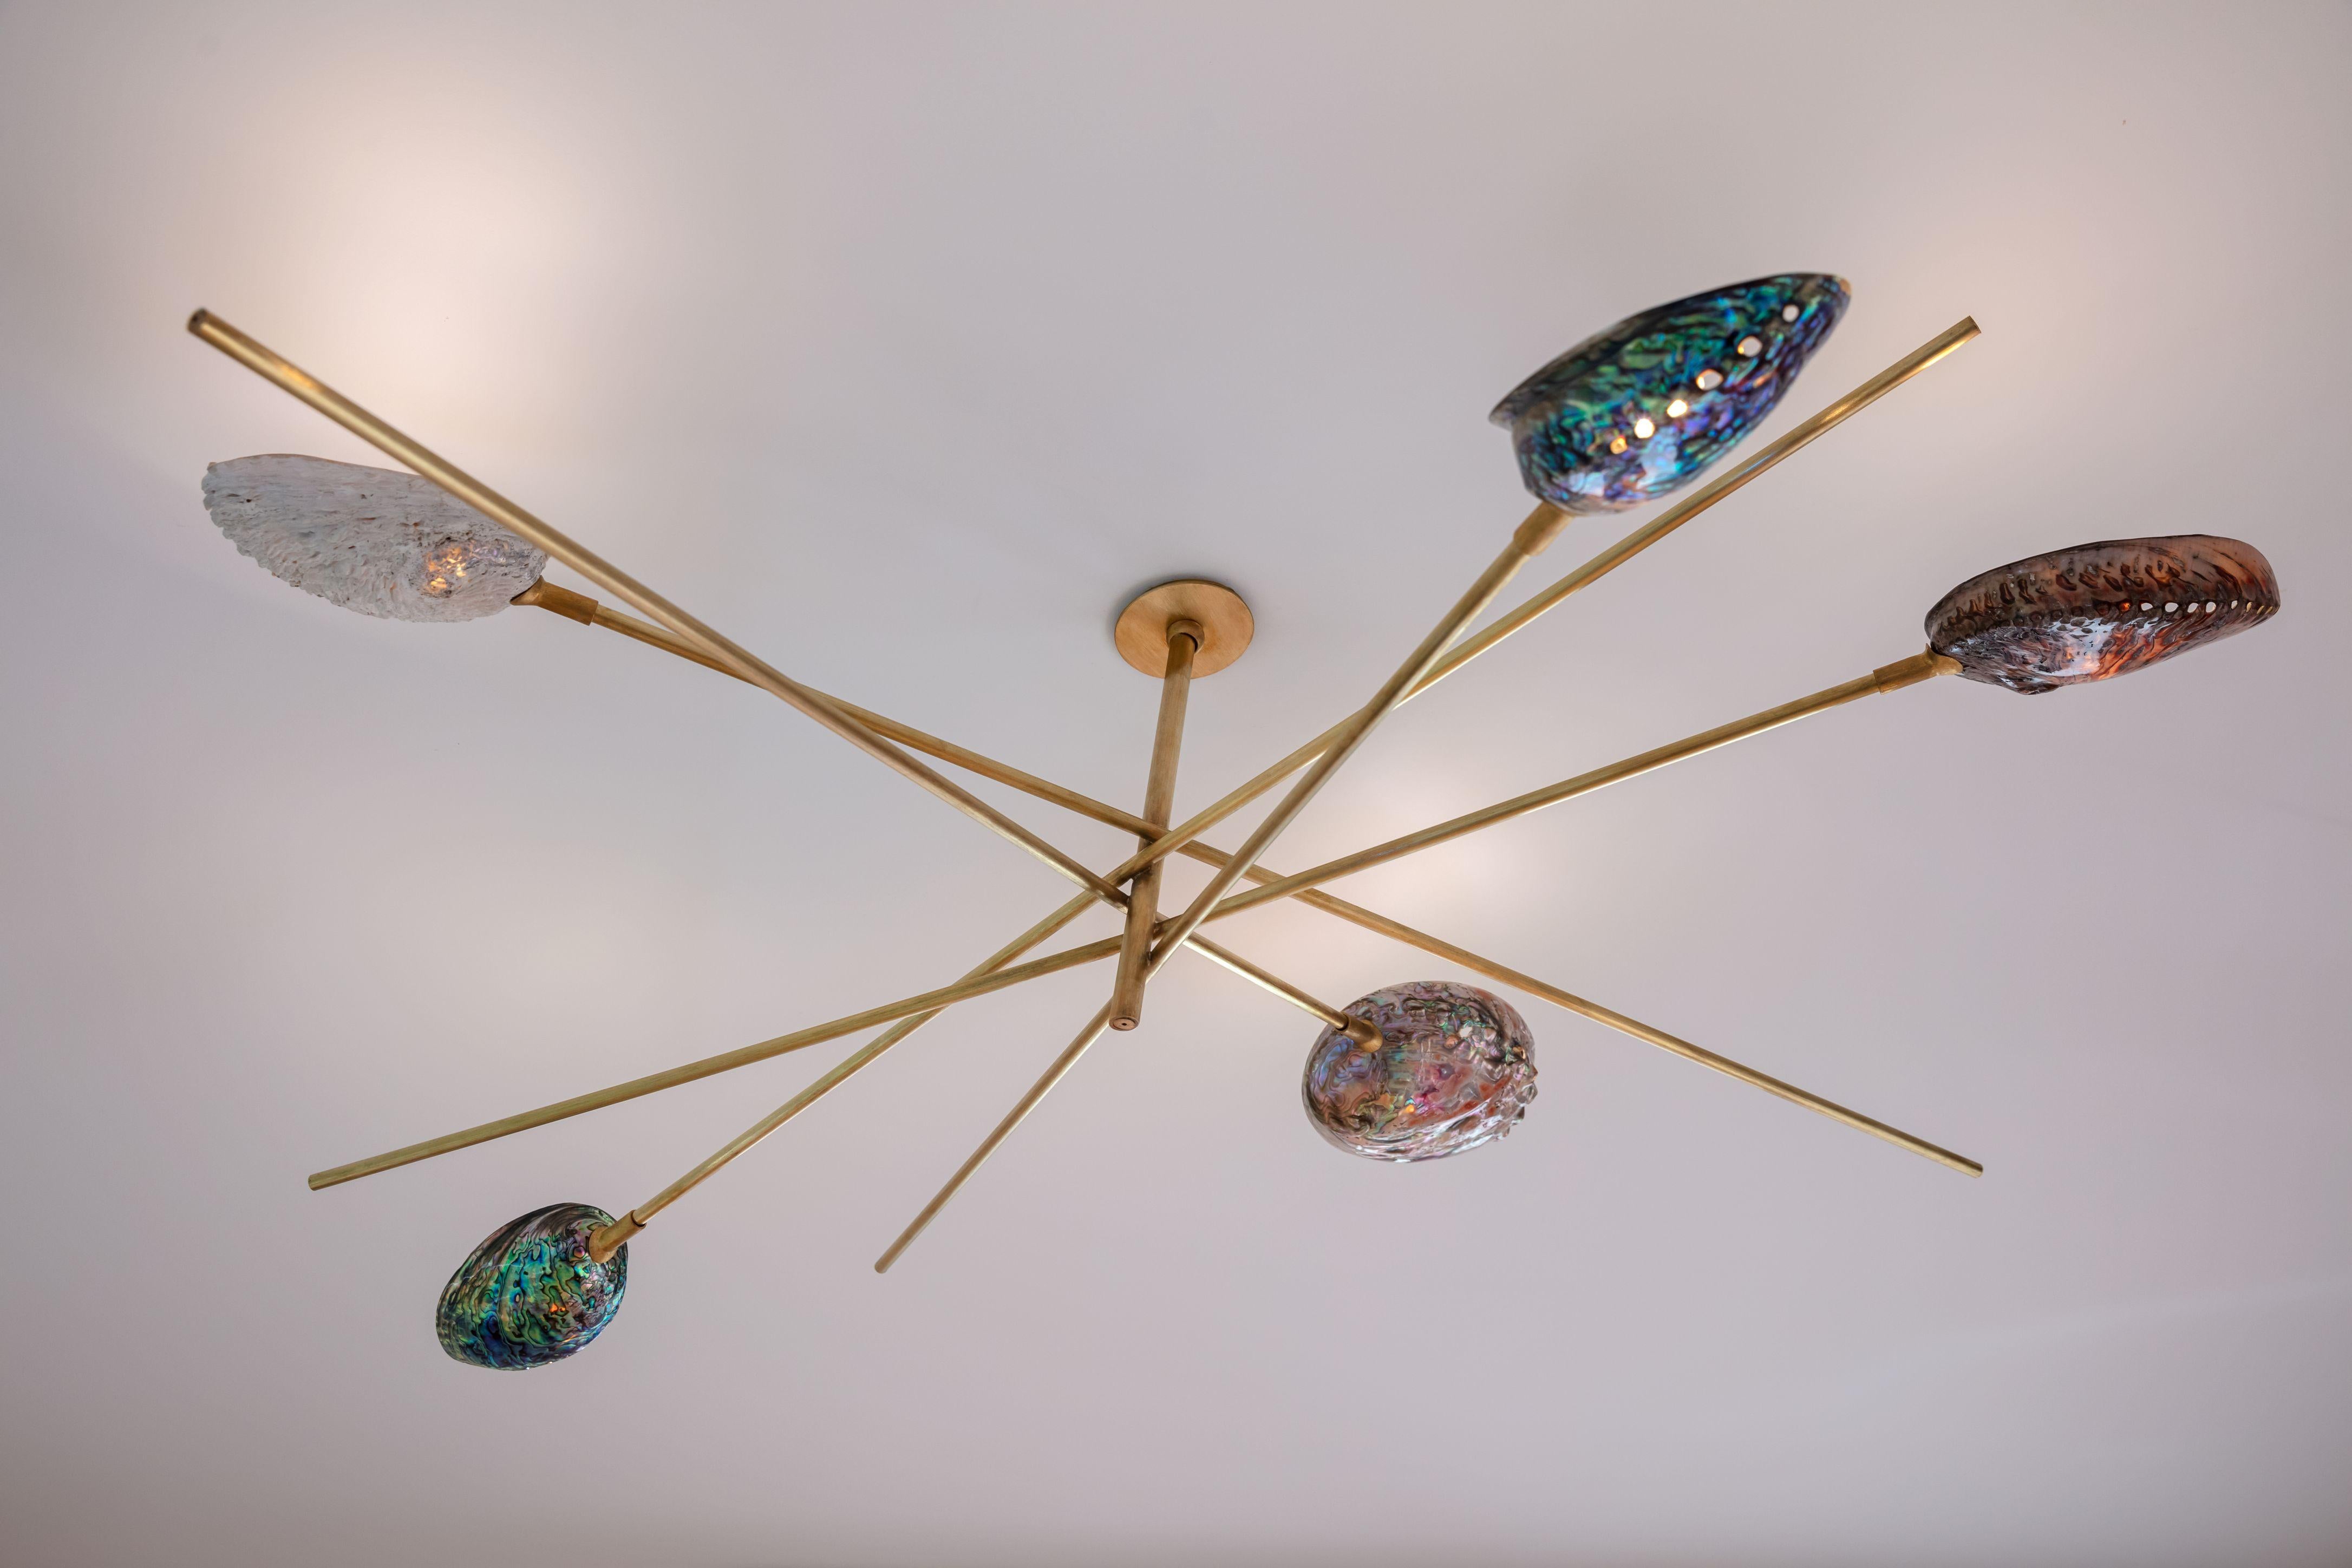 Coquillage chandelier by Ludovic Clément d'Armont
Materials: Brass, blown glass
Dimensions: diameter 120 x height 40 

Every creation of Ludovic Clément d’Armont can be made to order in any requested dimensions. Please contact us for custom made